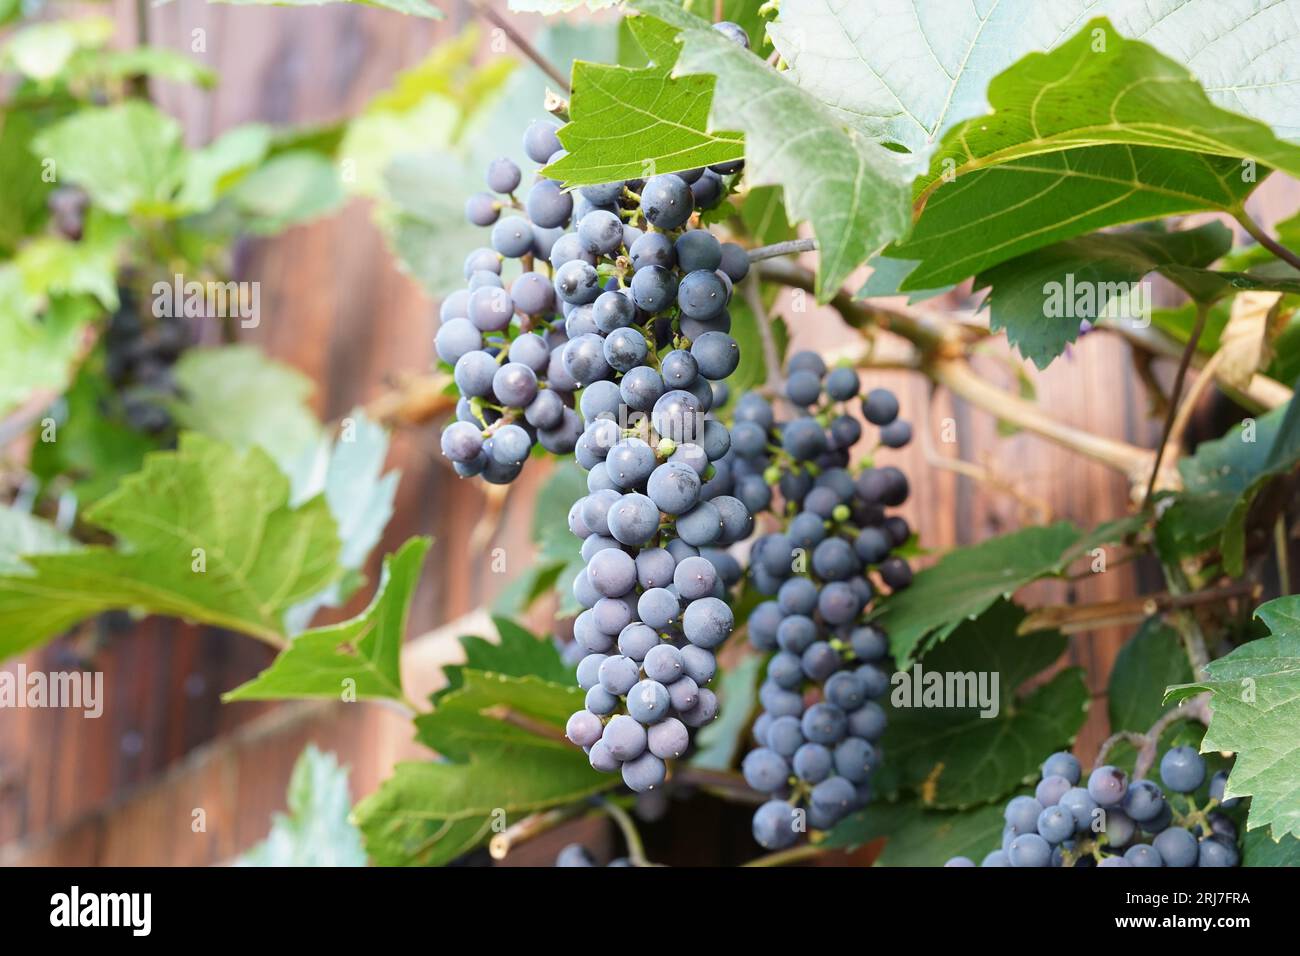 Cluster of black, or dark blue grapes, which are fruits of a plant called in Latin vitis vinifera, with some leaves on the background. Stock Photo